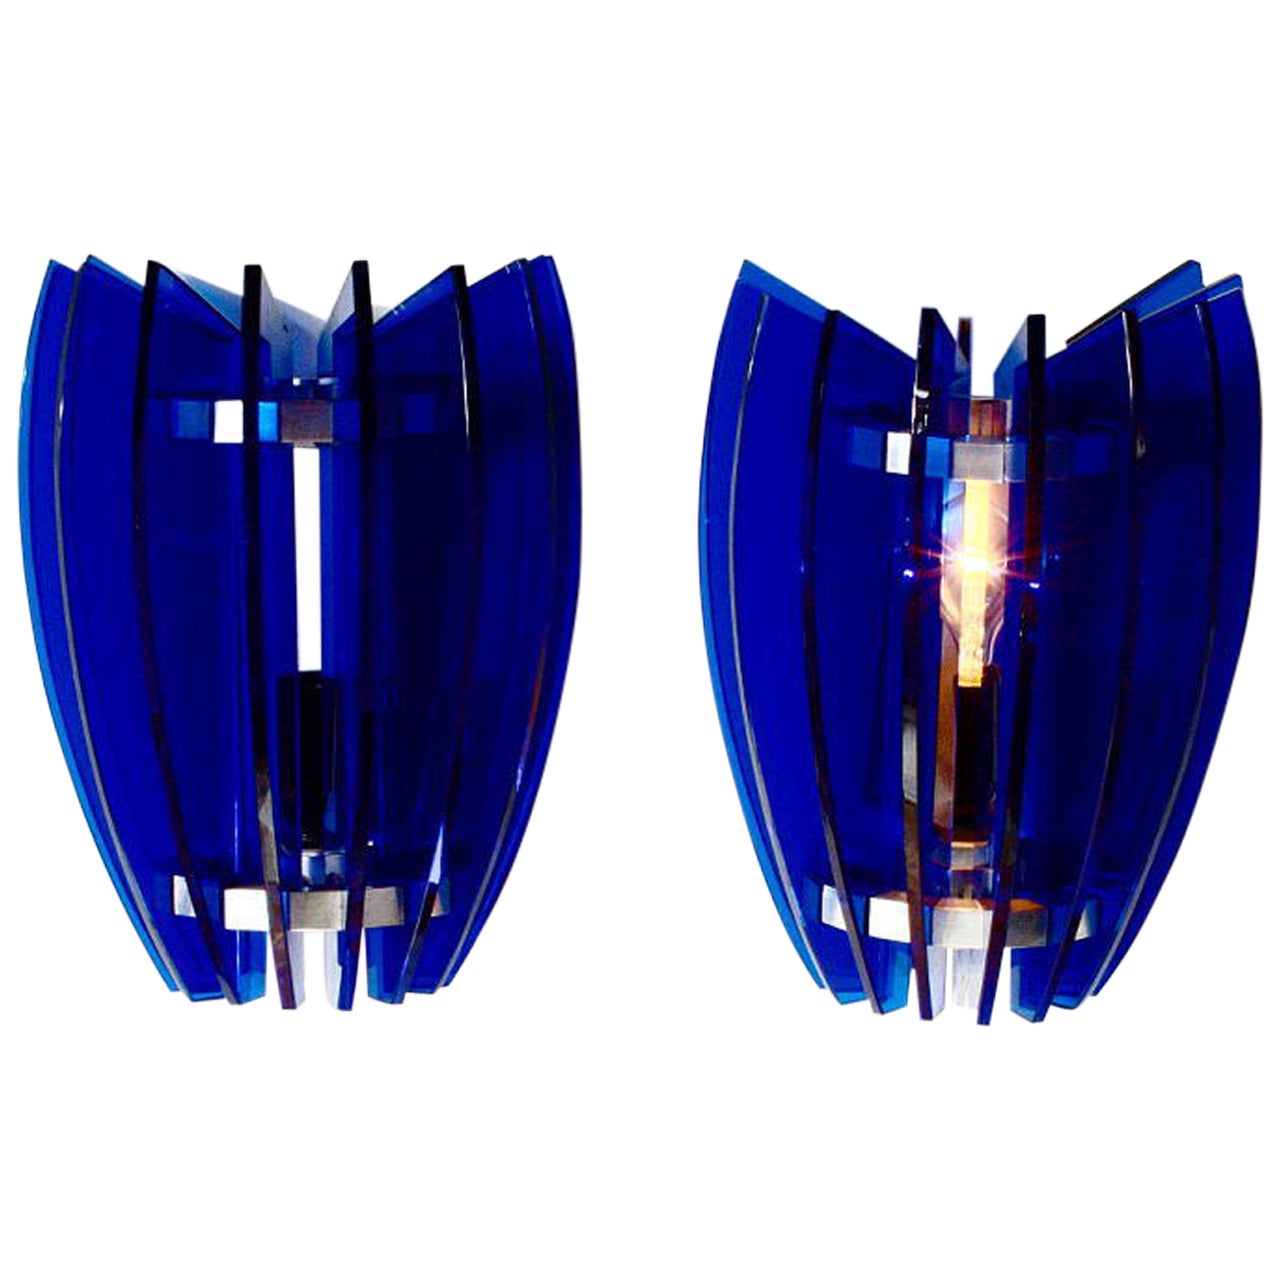 Pair of Sconces by Veca Milano in Cobalt Blue, Italy, 1970